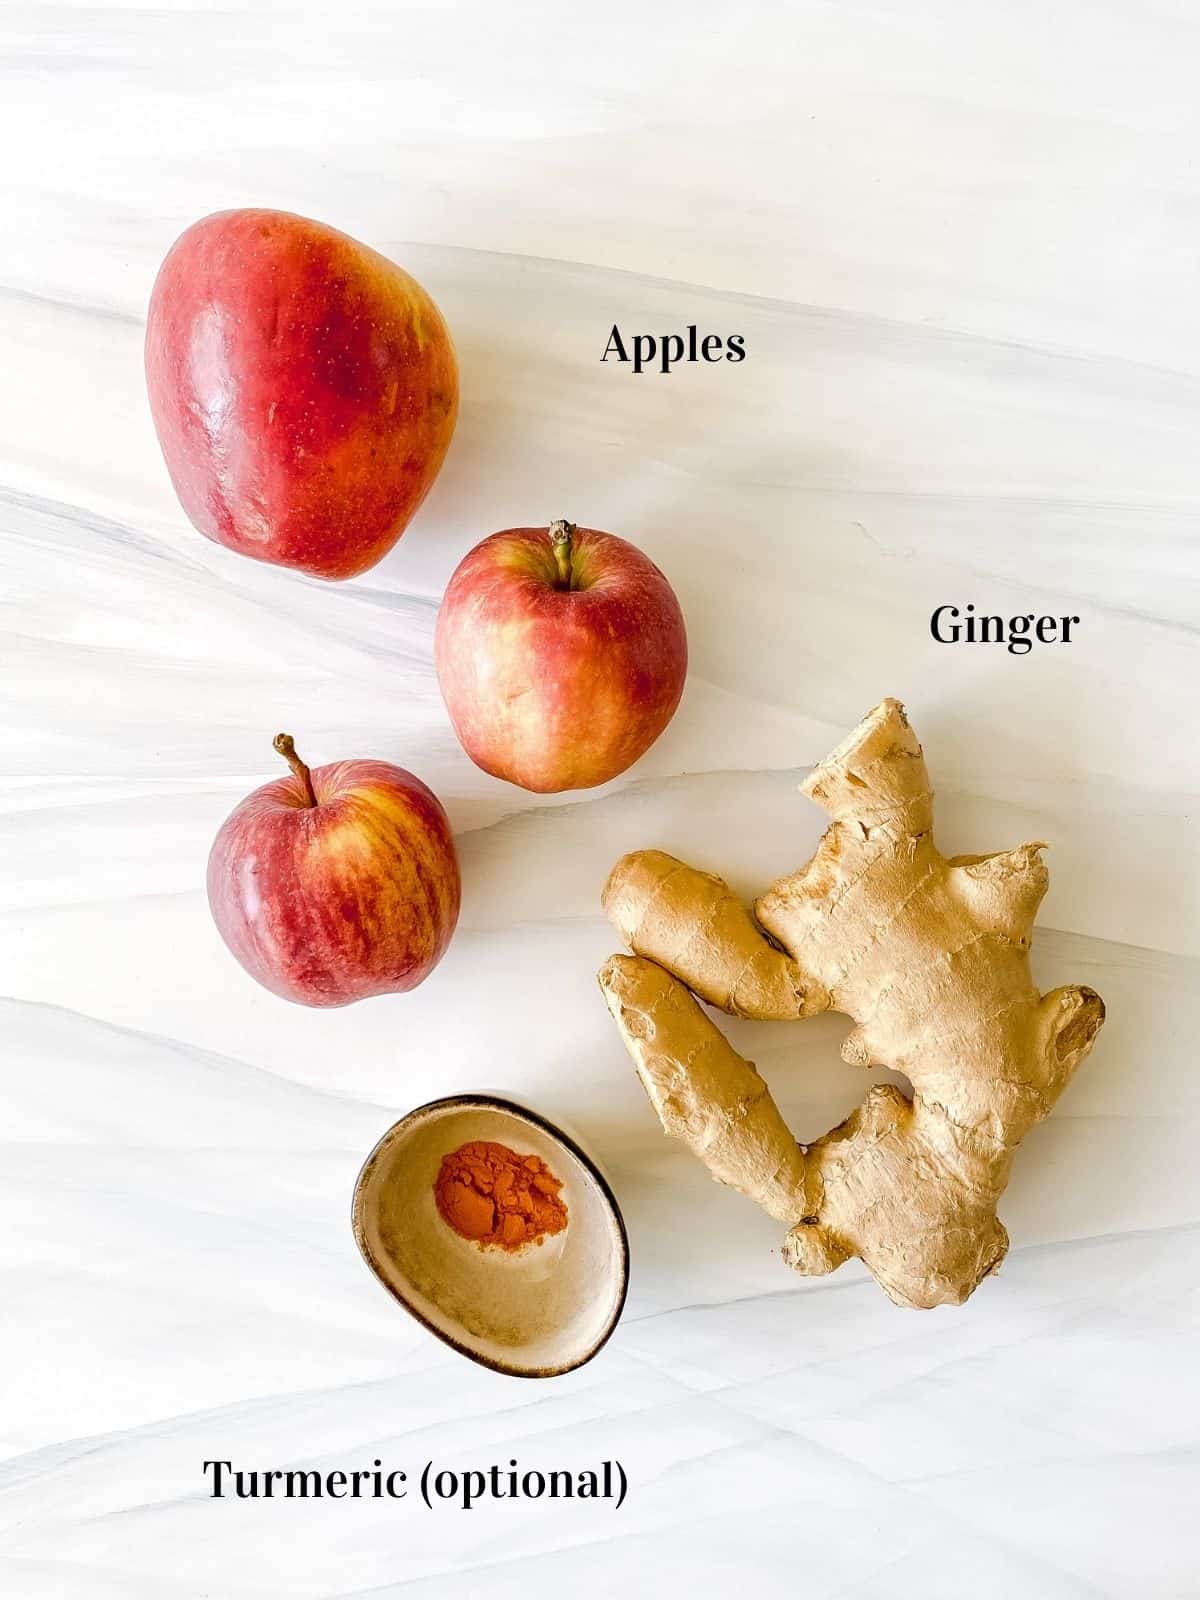 three apples, ginger and a small bowl of turmeric.